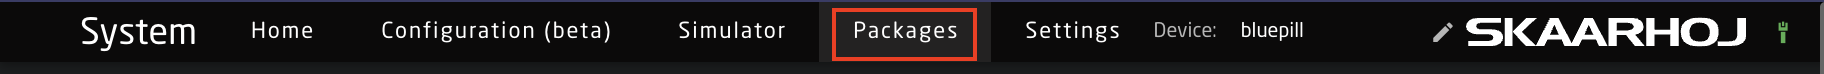 packages page redo.png